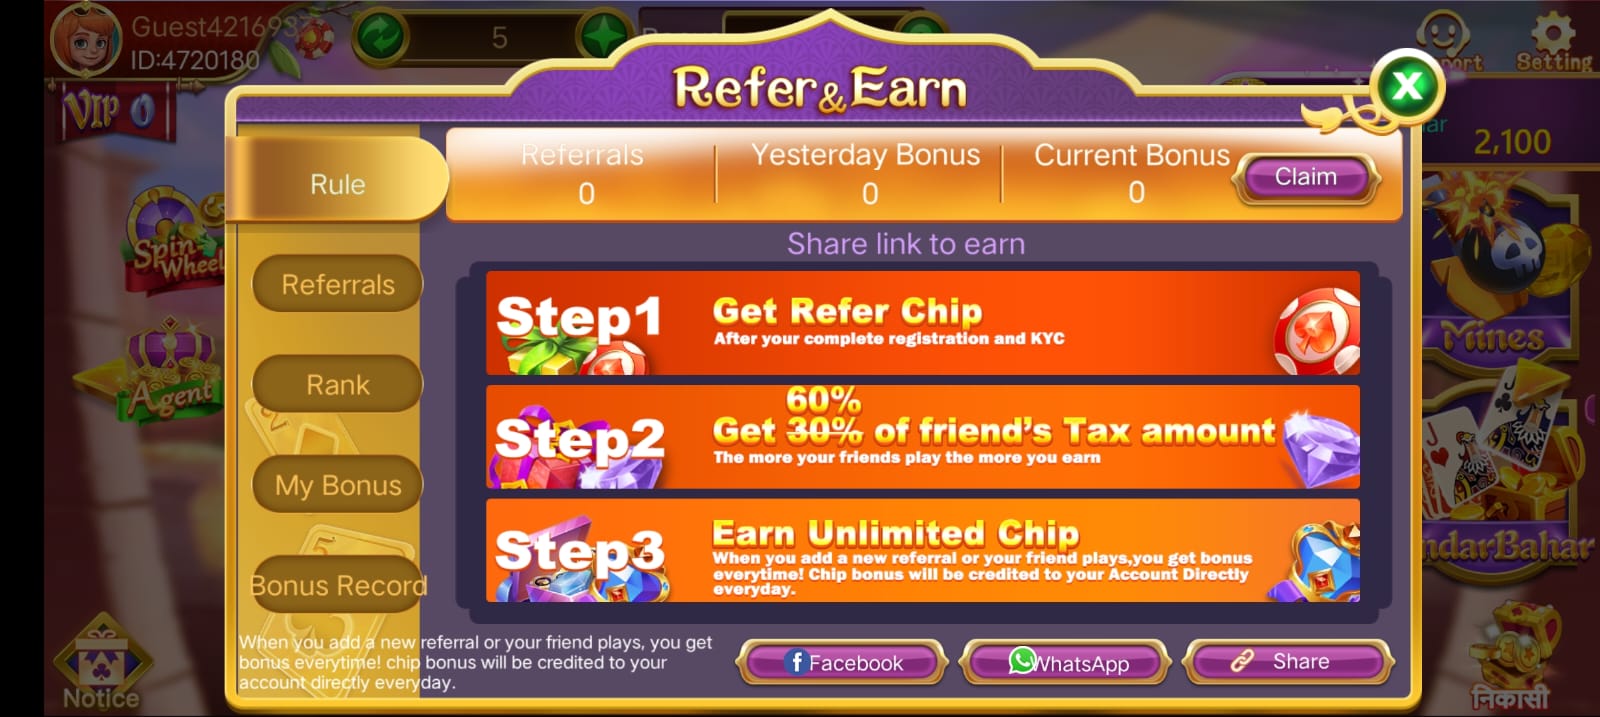 Refer And Earn In Rummy Tour Application